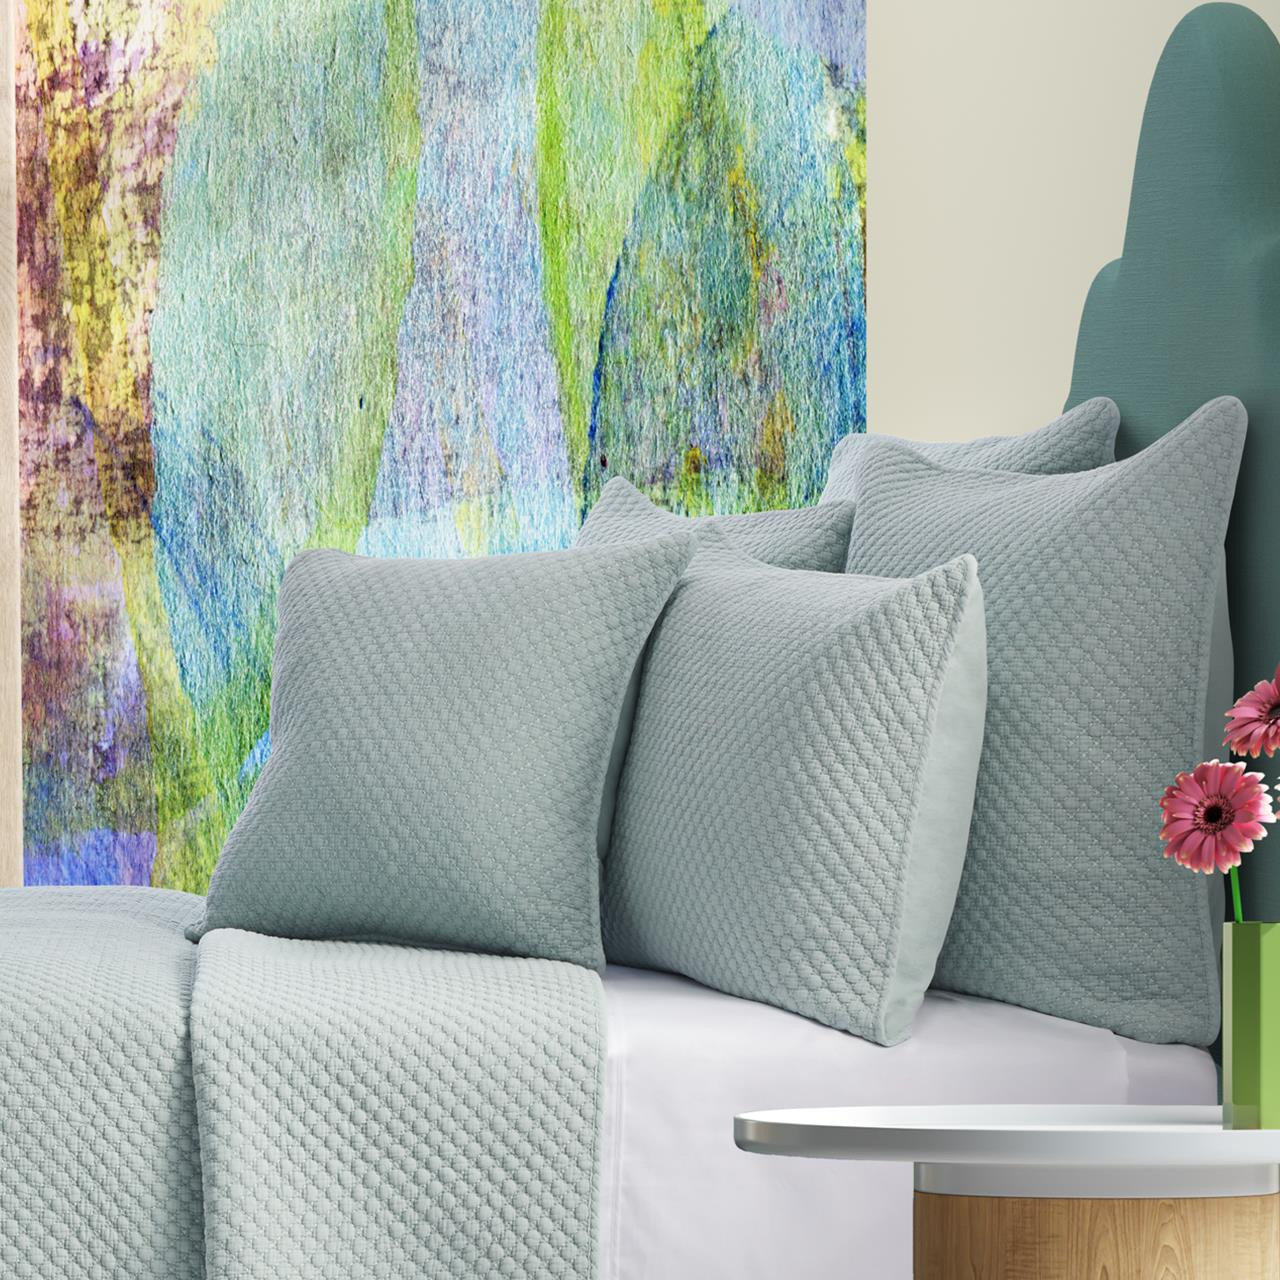 https://cdn10.bigcommerce.com/s-9ese1/products/20380/images/125199/Emery-Sea-Foam-18-Square-Pillow-193842117101_image2__55856.1623572601.1280.1280.jpg?c=2